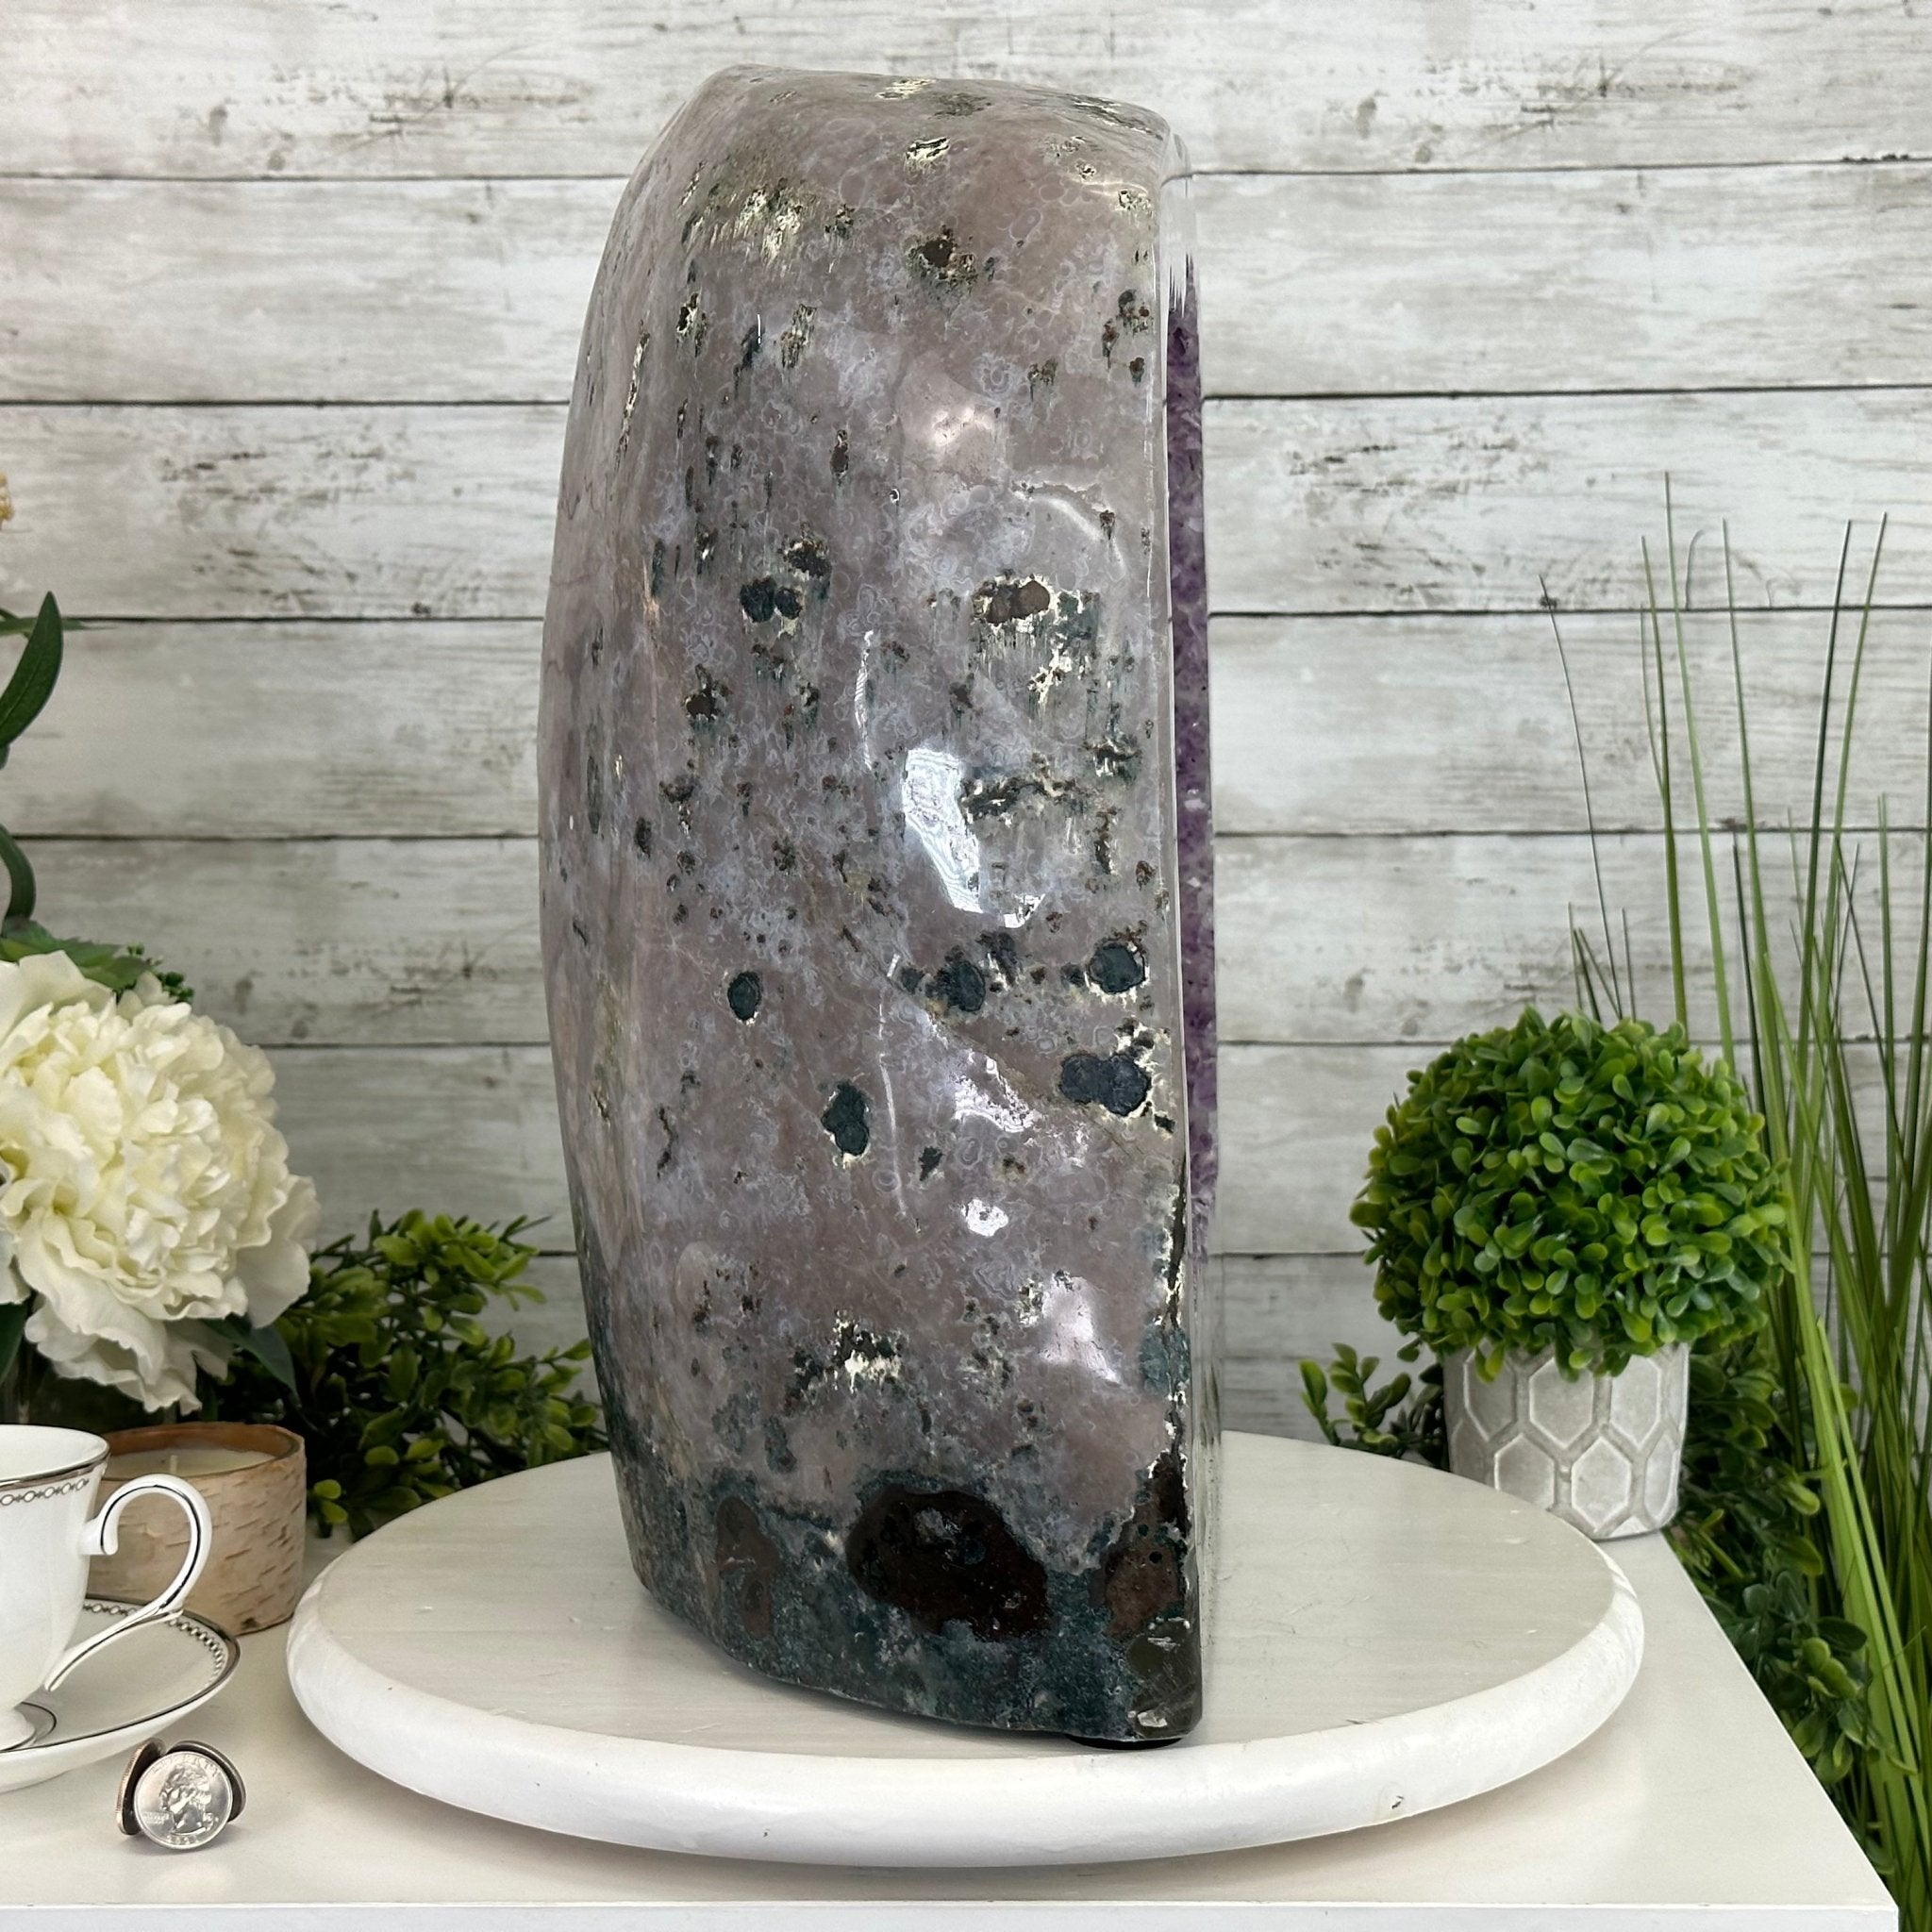 Extra Quality Polished Brazilian Amethyst Cathedral, 62.6 lbs & 16.25" tall Model #5602-0161 by Brazil Gems - Brazil GemsBrazil GemsExtra Quality Polished Brazilian Amethyst Cathedral, 62.6 lbs & 16.25" tall Model #5602-0161 by Brazil GemsPolished Cathedrals5602-0161